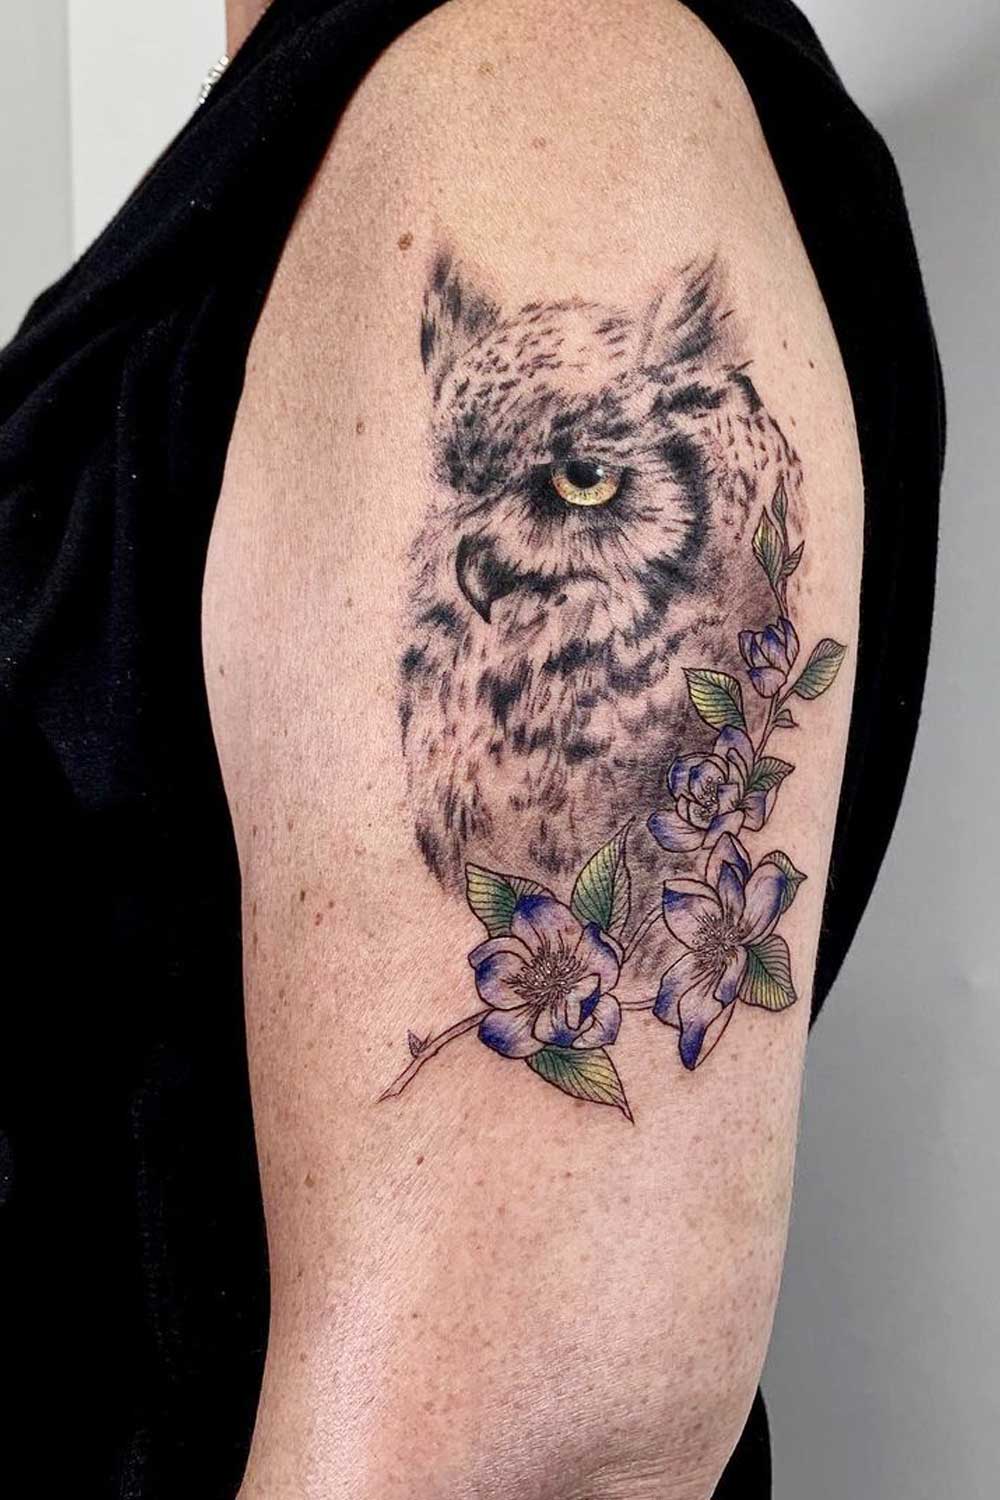 Realistic Owl Tattoo with Flowers